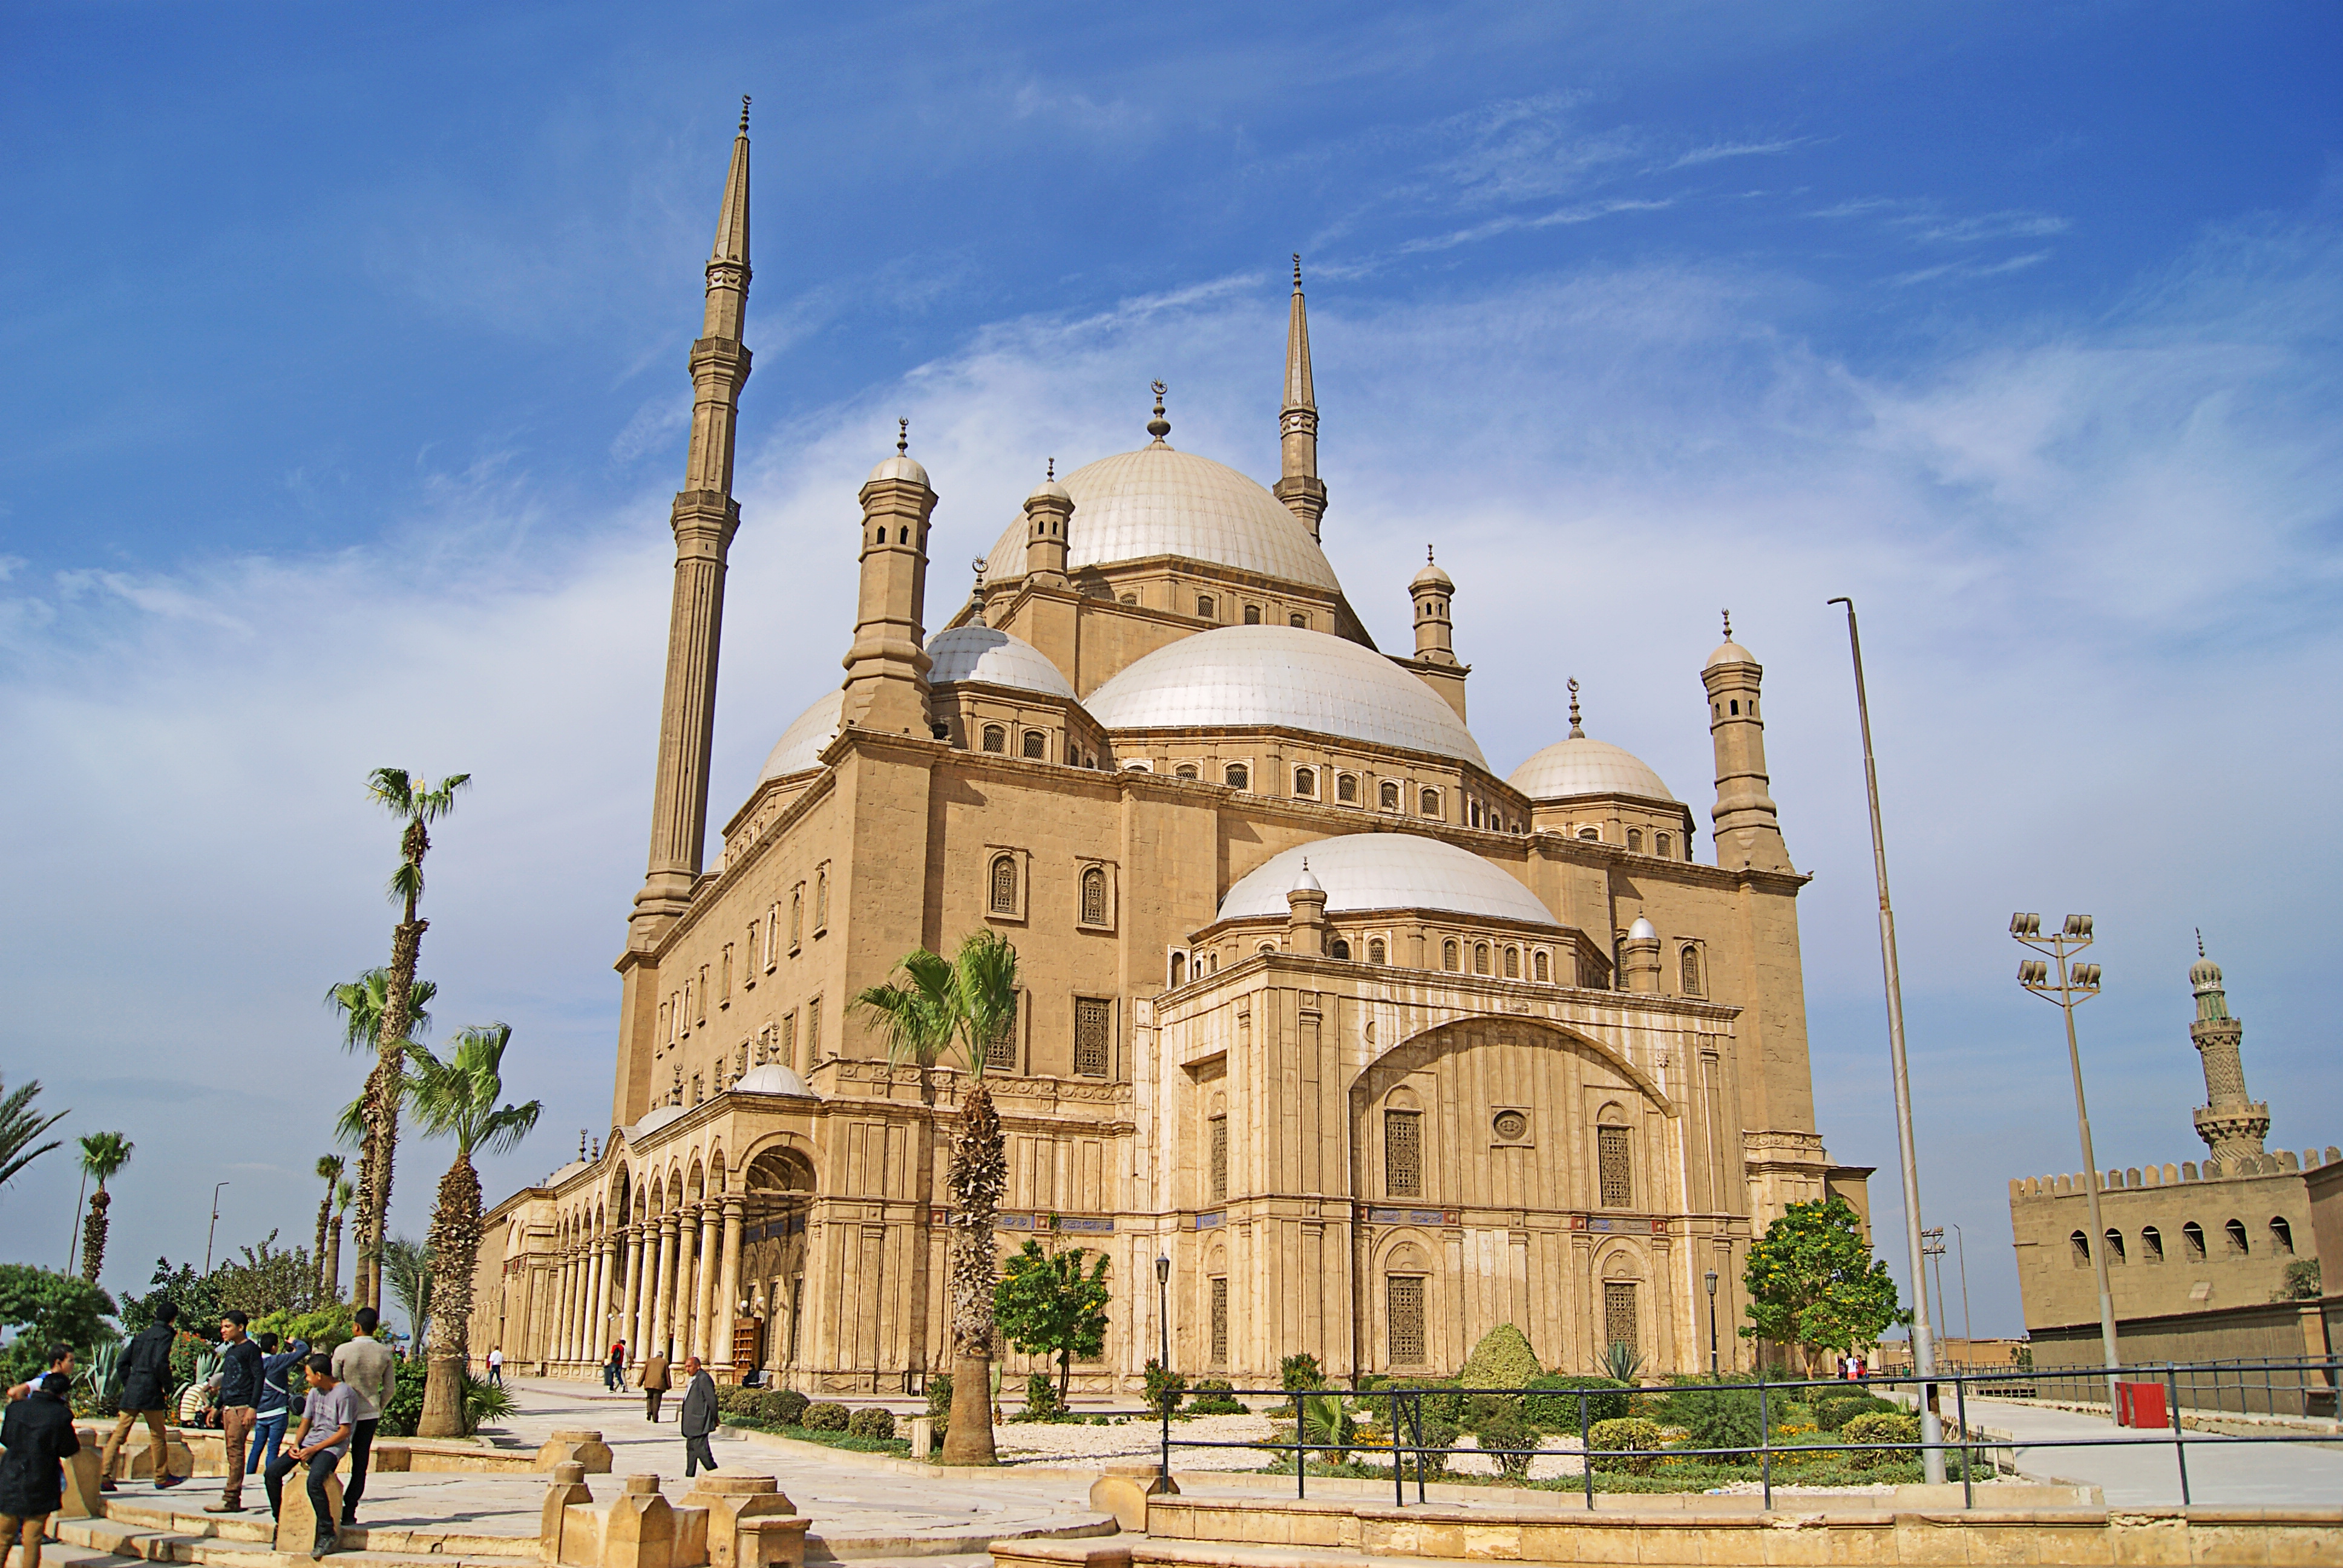 1581258726 247 Tourist places in Cairo and their prices - Tourist places in Cairo and their prices